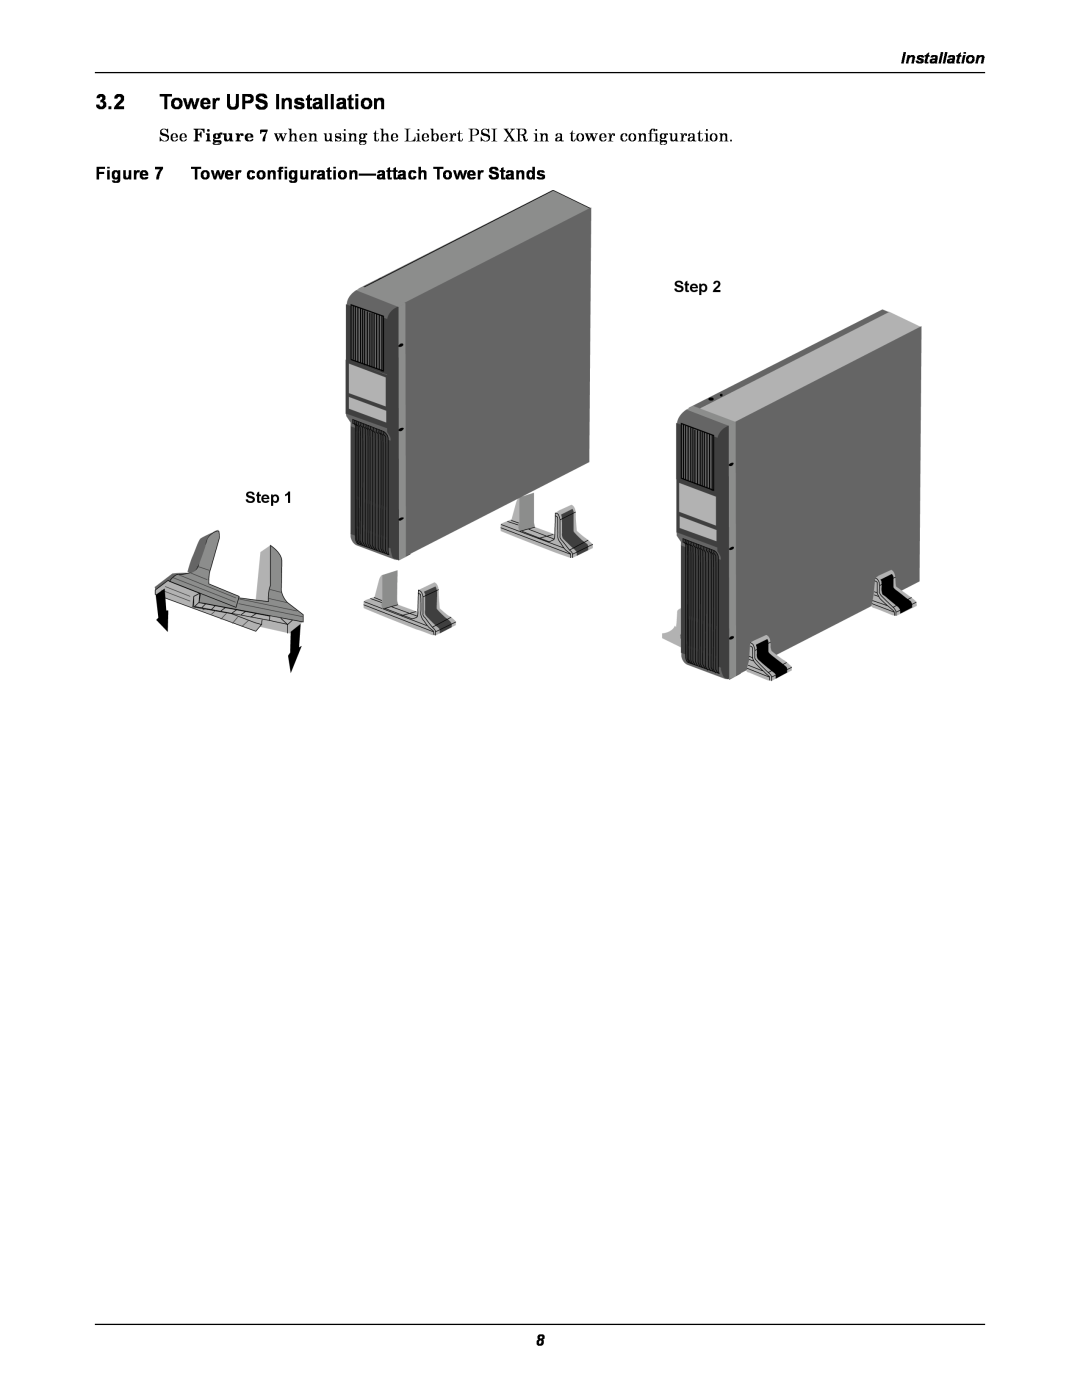 Emerson 3000, 1500, 1000, 2200 user manual 3.2Tower UPS Installation, Tower configuration—attachTower Stands 